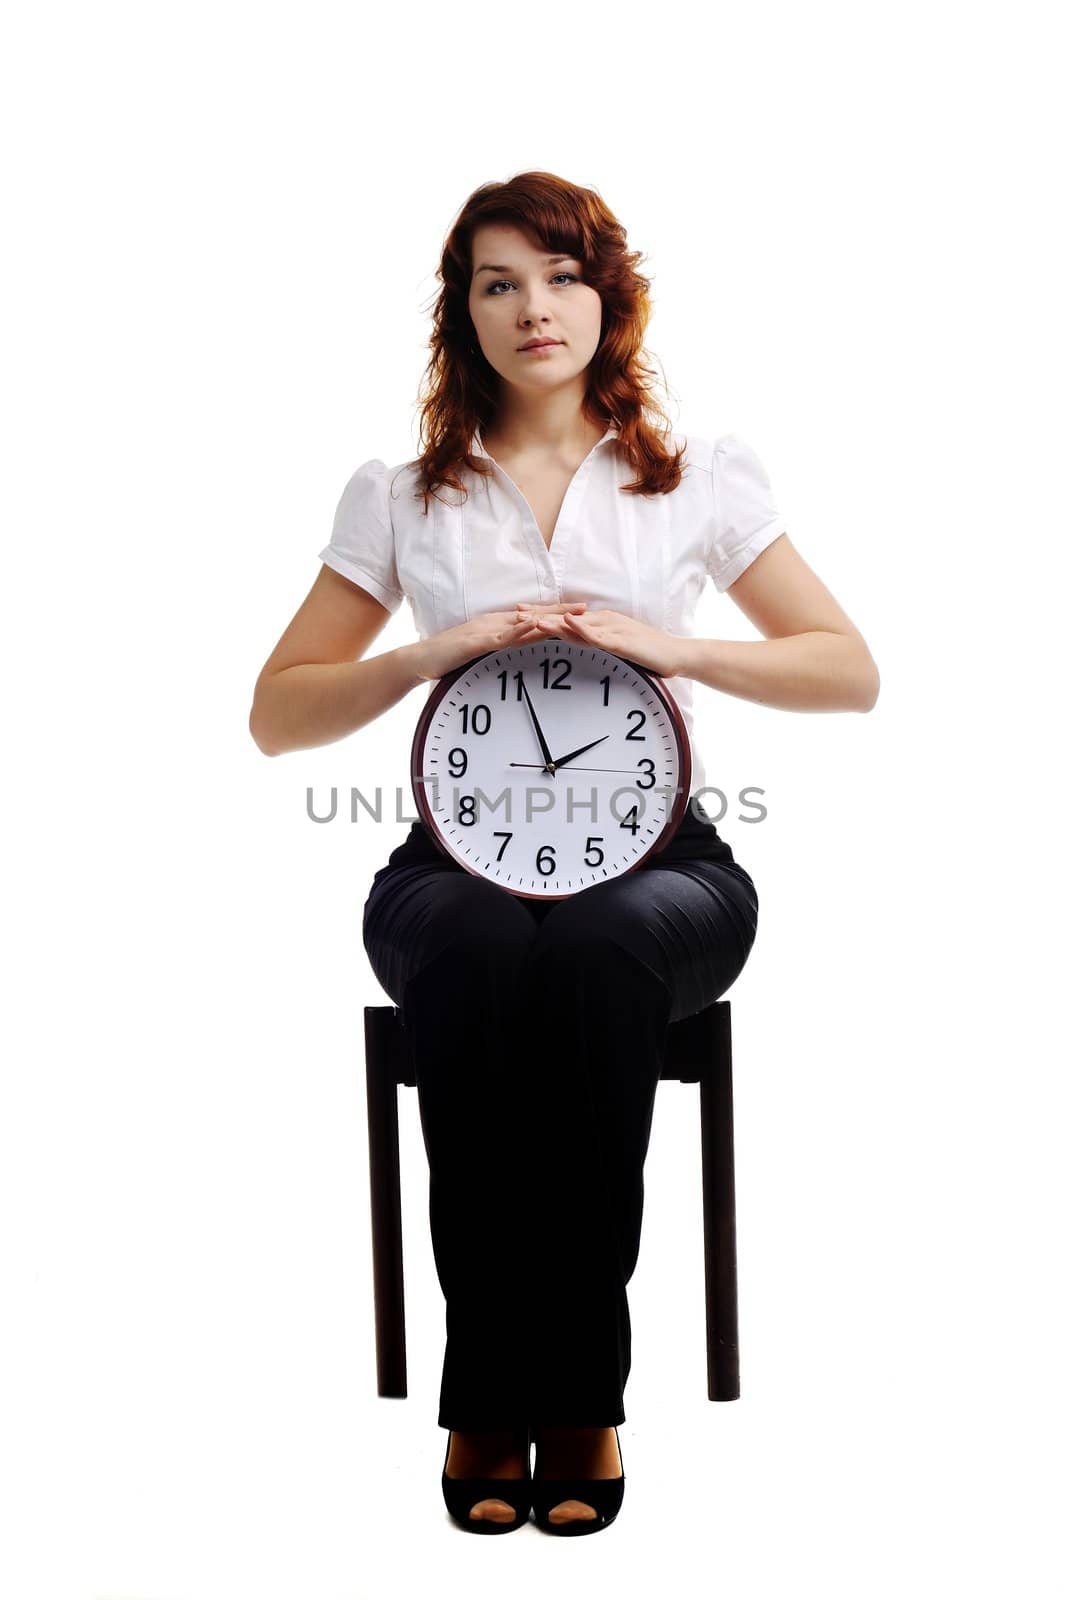 An image of a woman holding a big clock